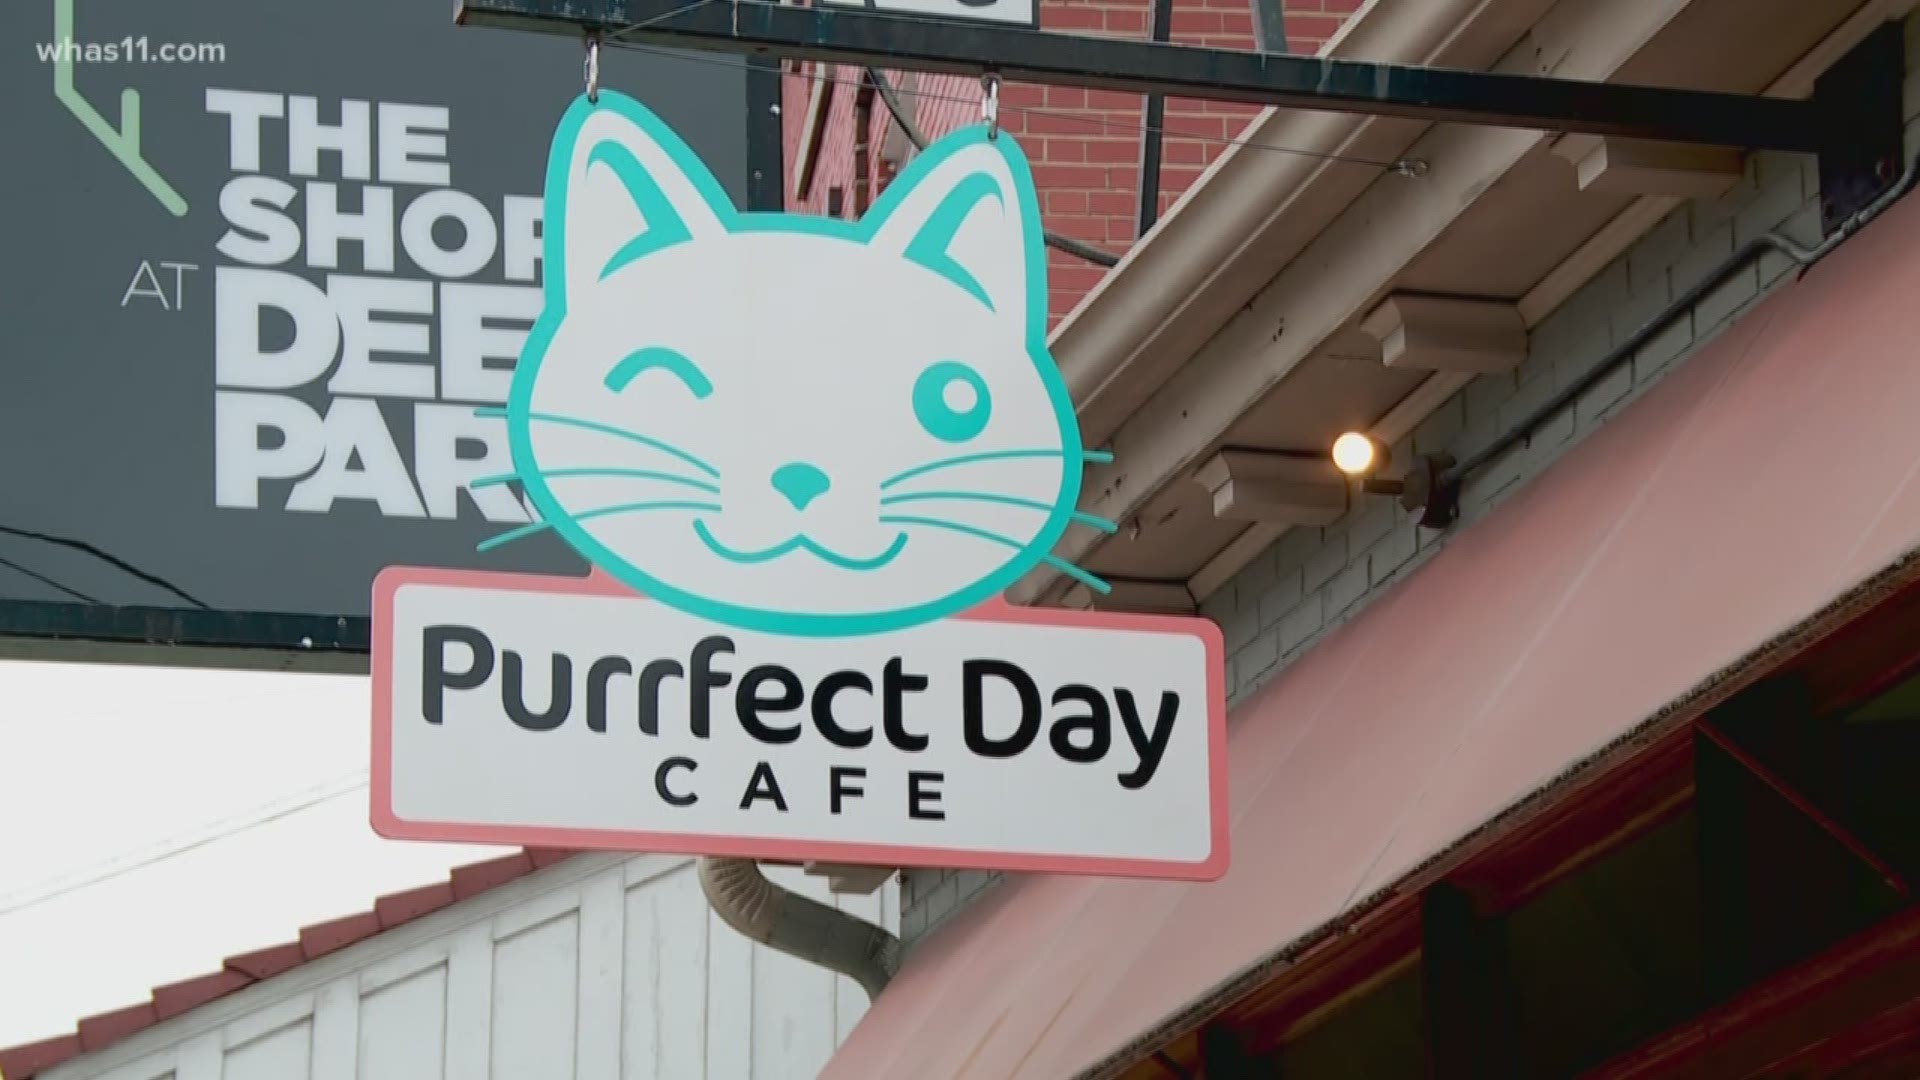 On busy Bardstown Road, there's one spot that has cats sitting the window and beer served in the back. That place is Purrfect Day Cat Cafe, and it's saving cats' lives.